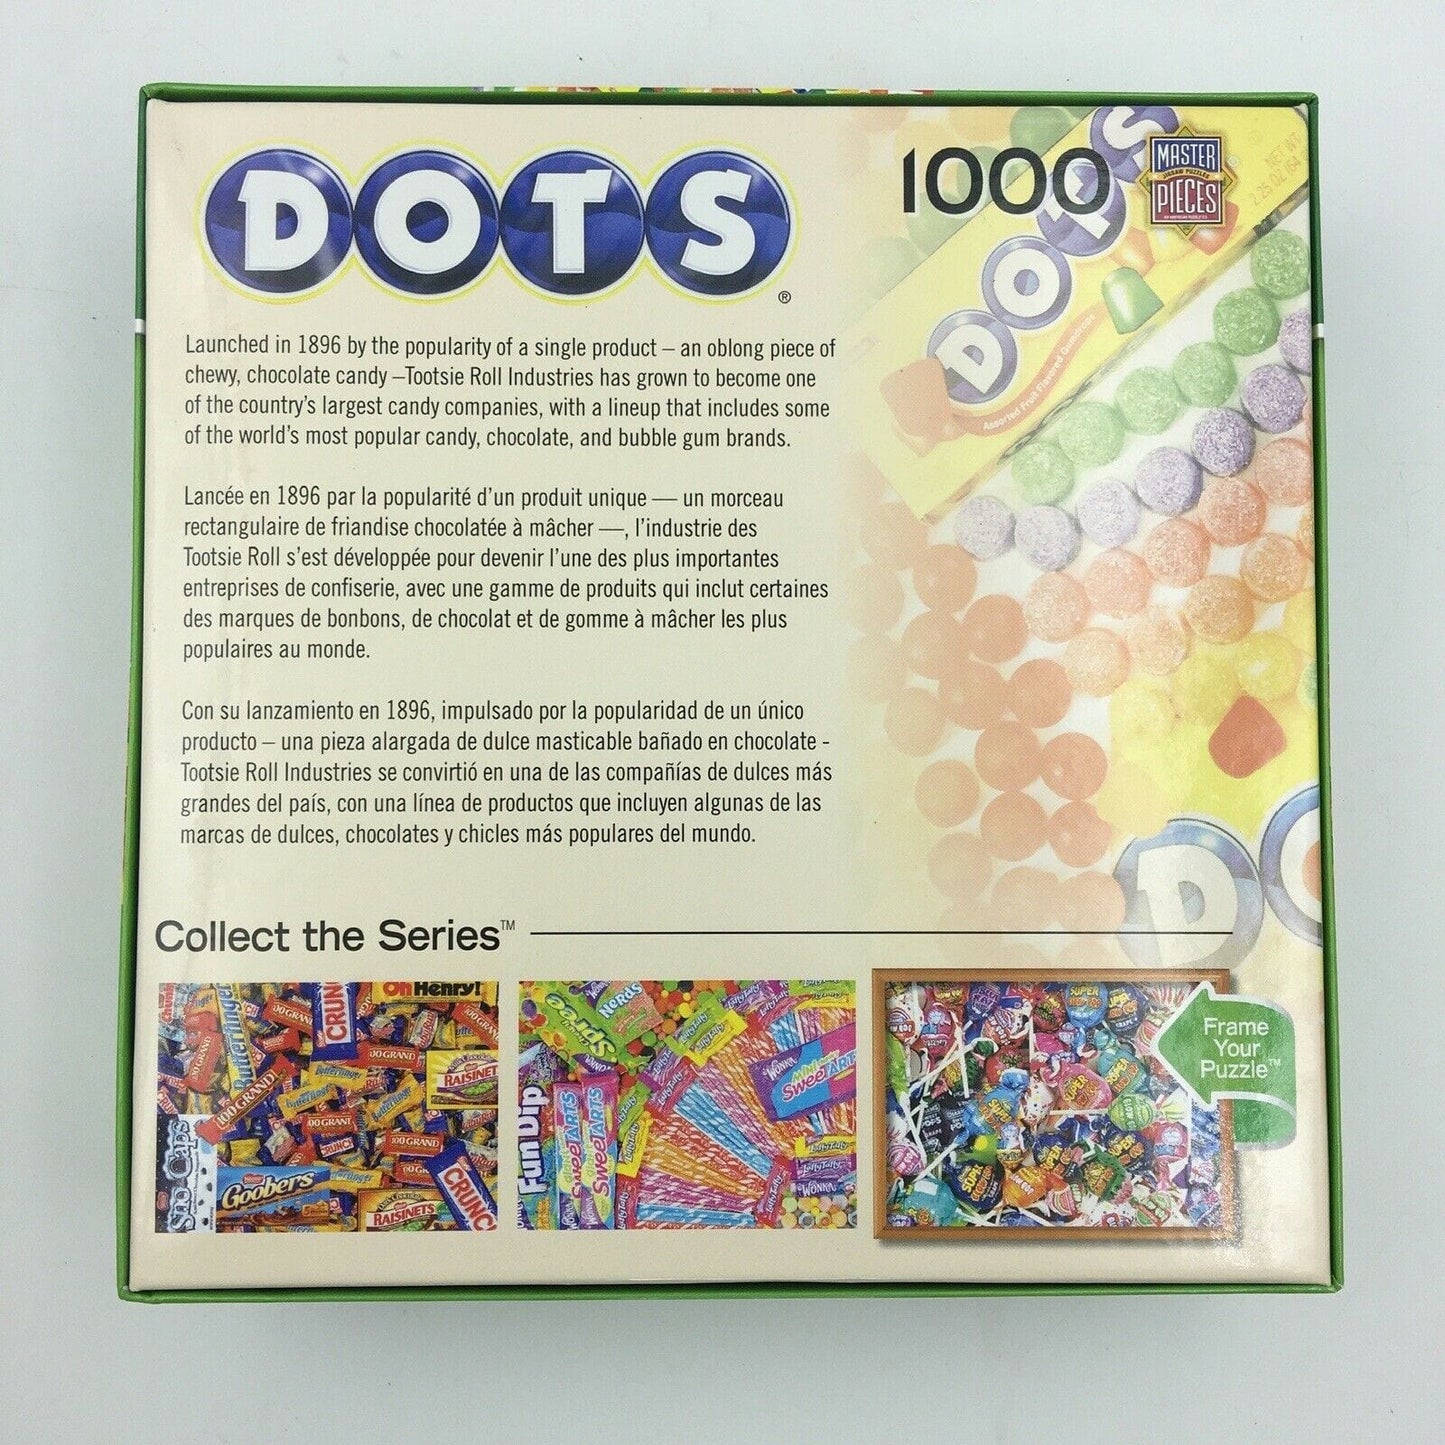 Master Pieces 1000 Piece "DOTS" Jigsaw Puzzle 🦭 NEW